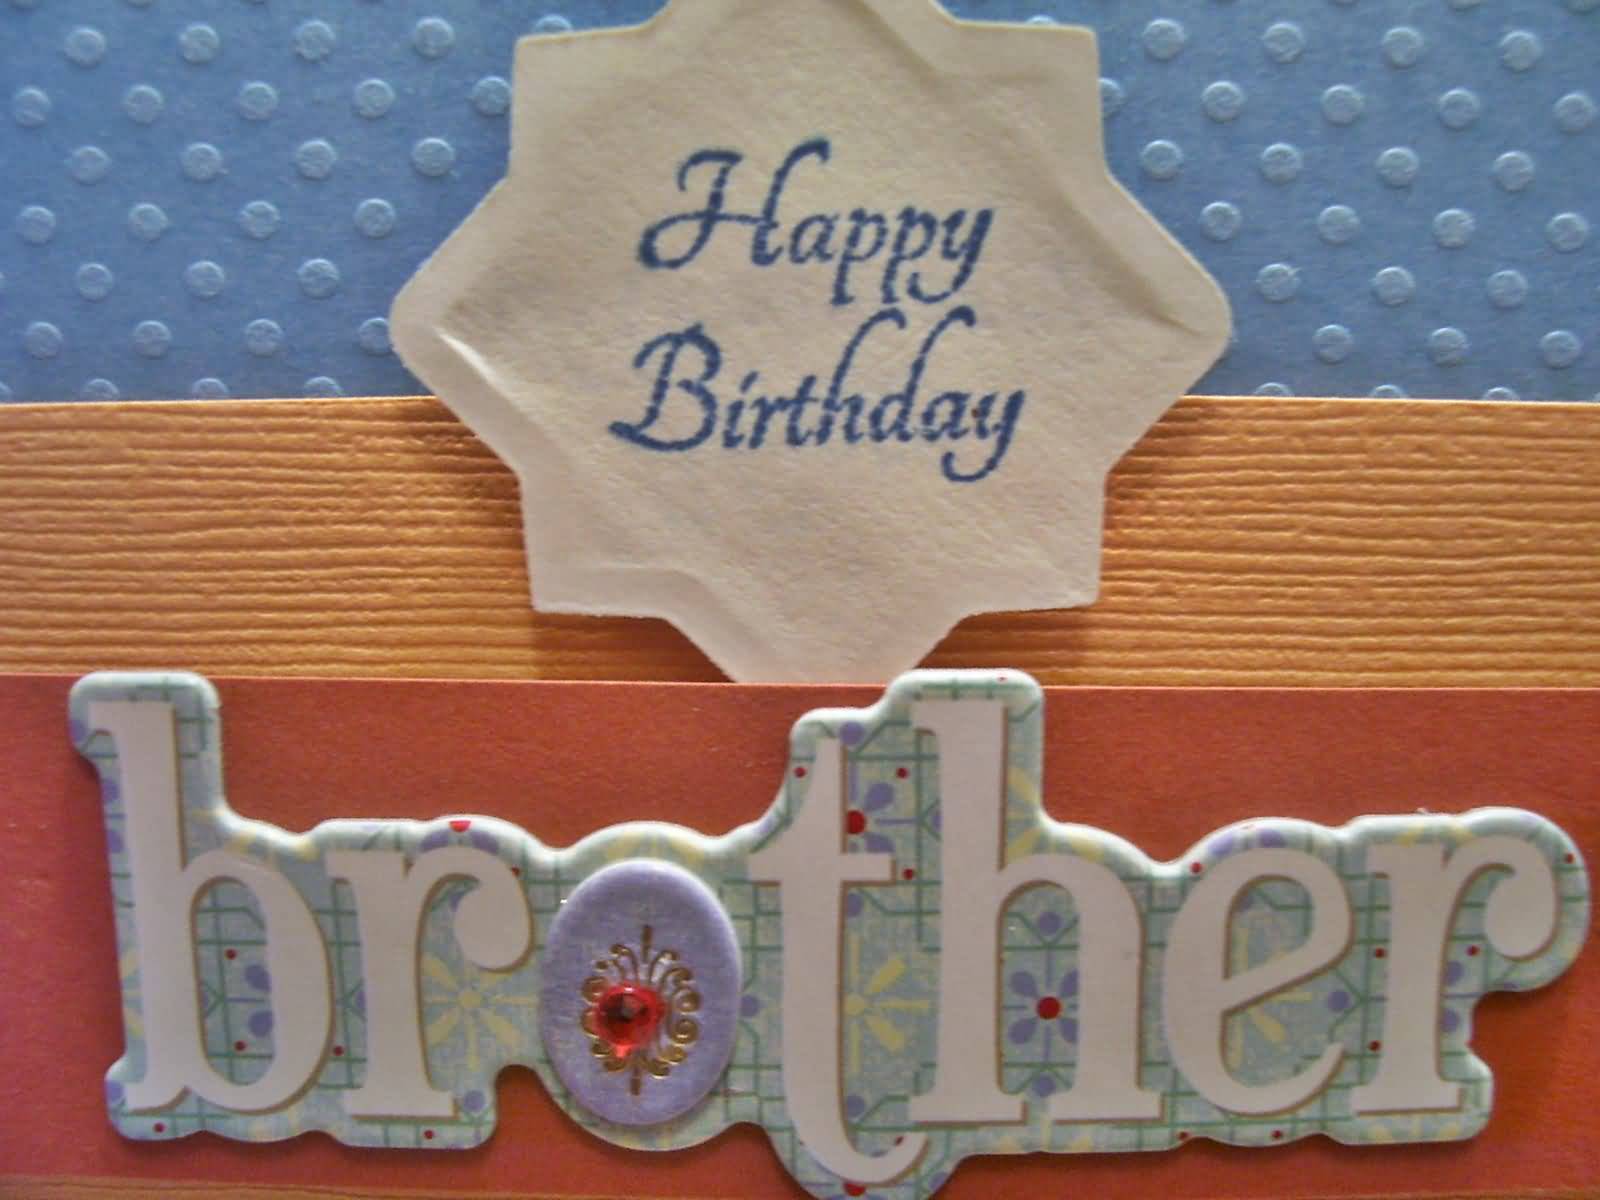 Happy Birthday Brother Homemade Greeting Card Design - Beautiful Pictures Of Birthday For Brother - HD Wallpaper 